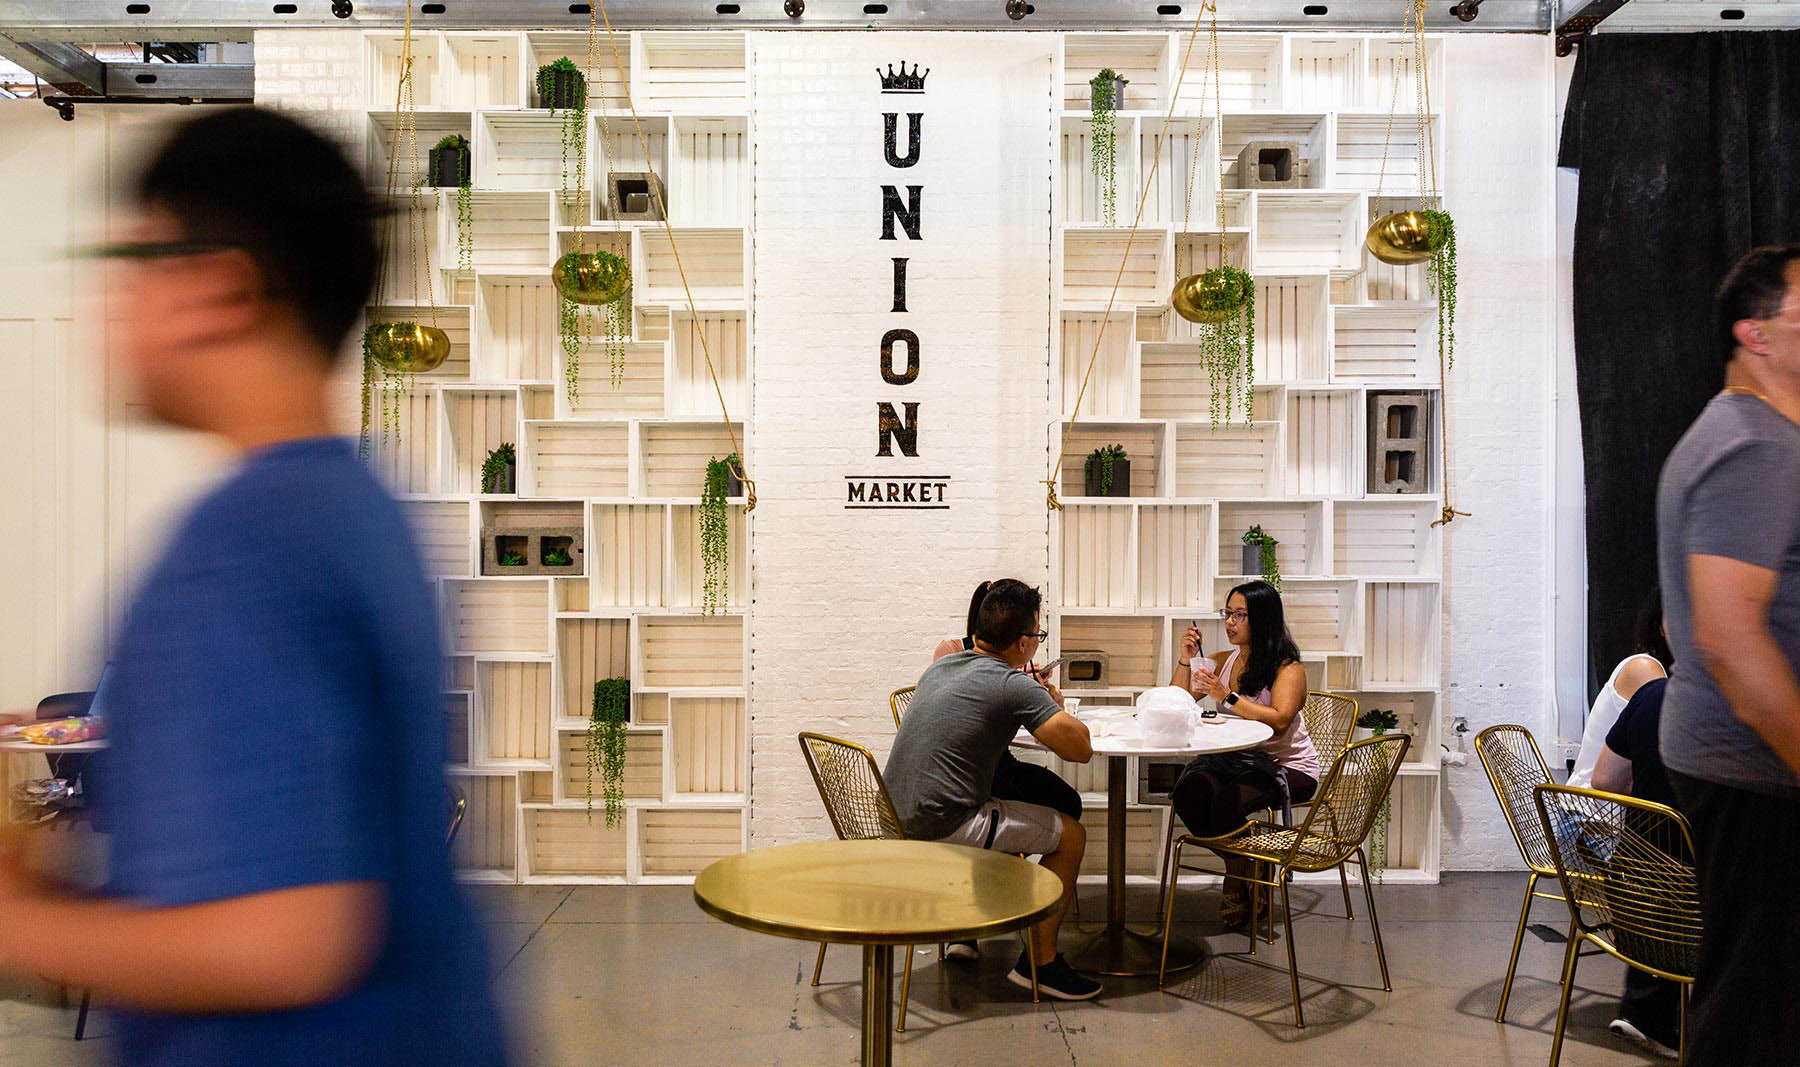 union market food and retail close to broadstone archive apartments in orange county